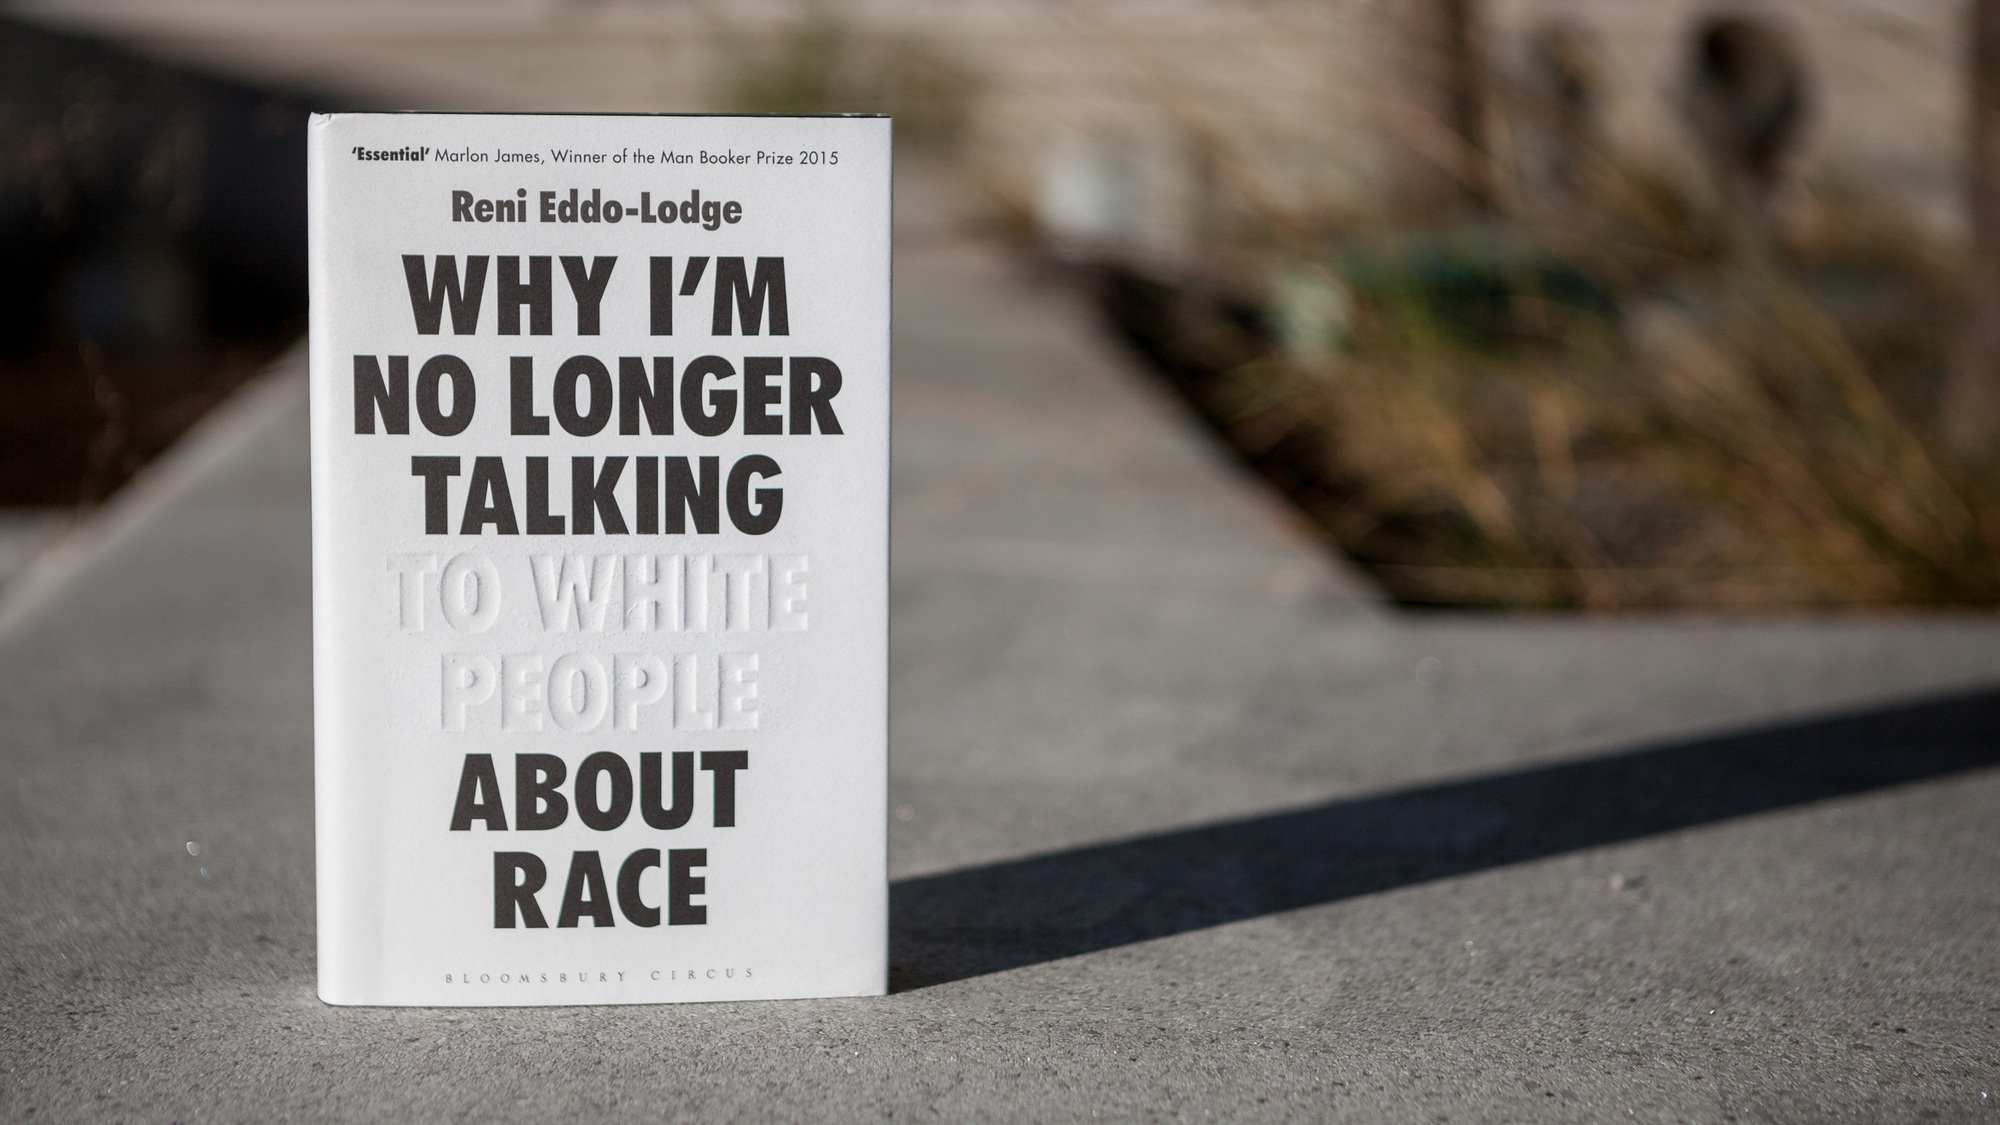 What To Read This Week: To Educate Yourself On The Black Experience